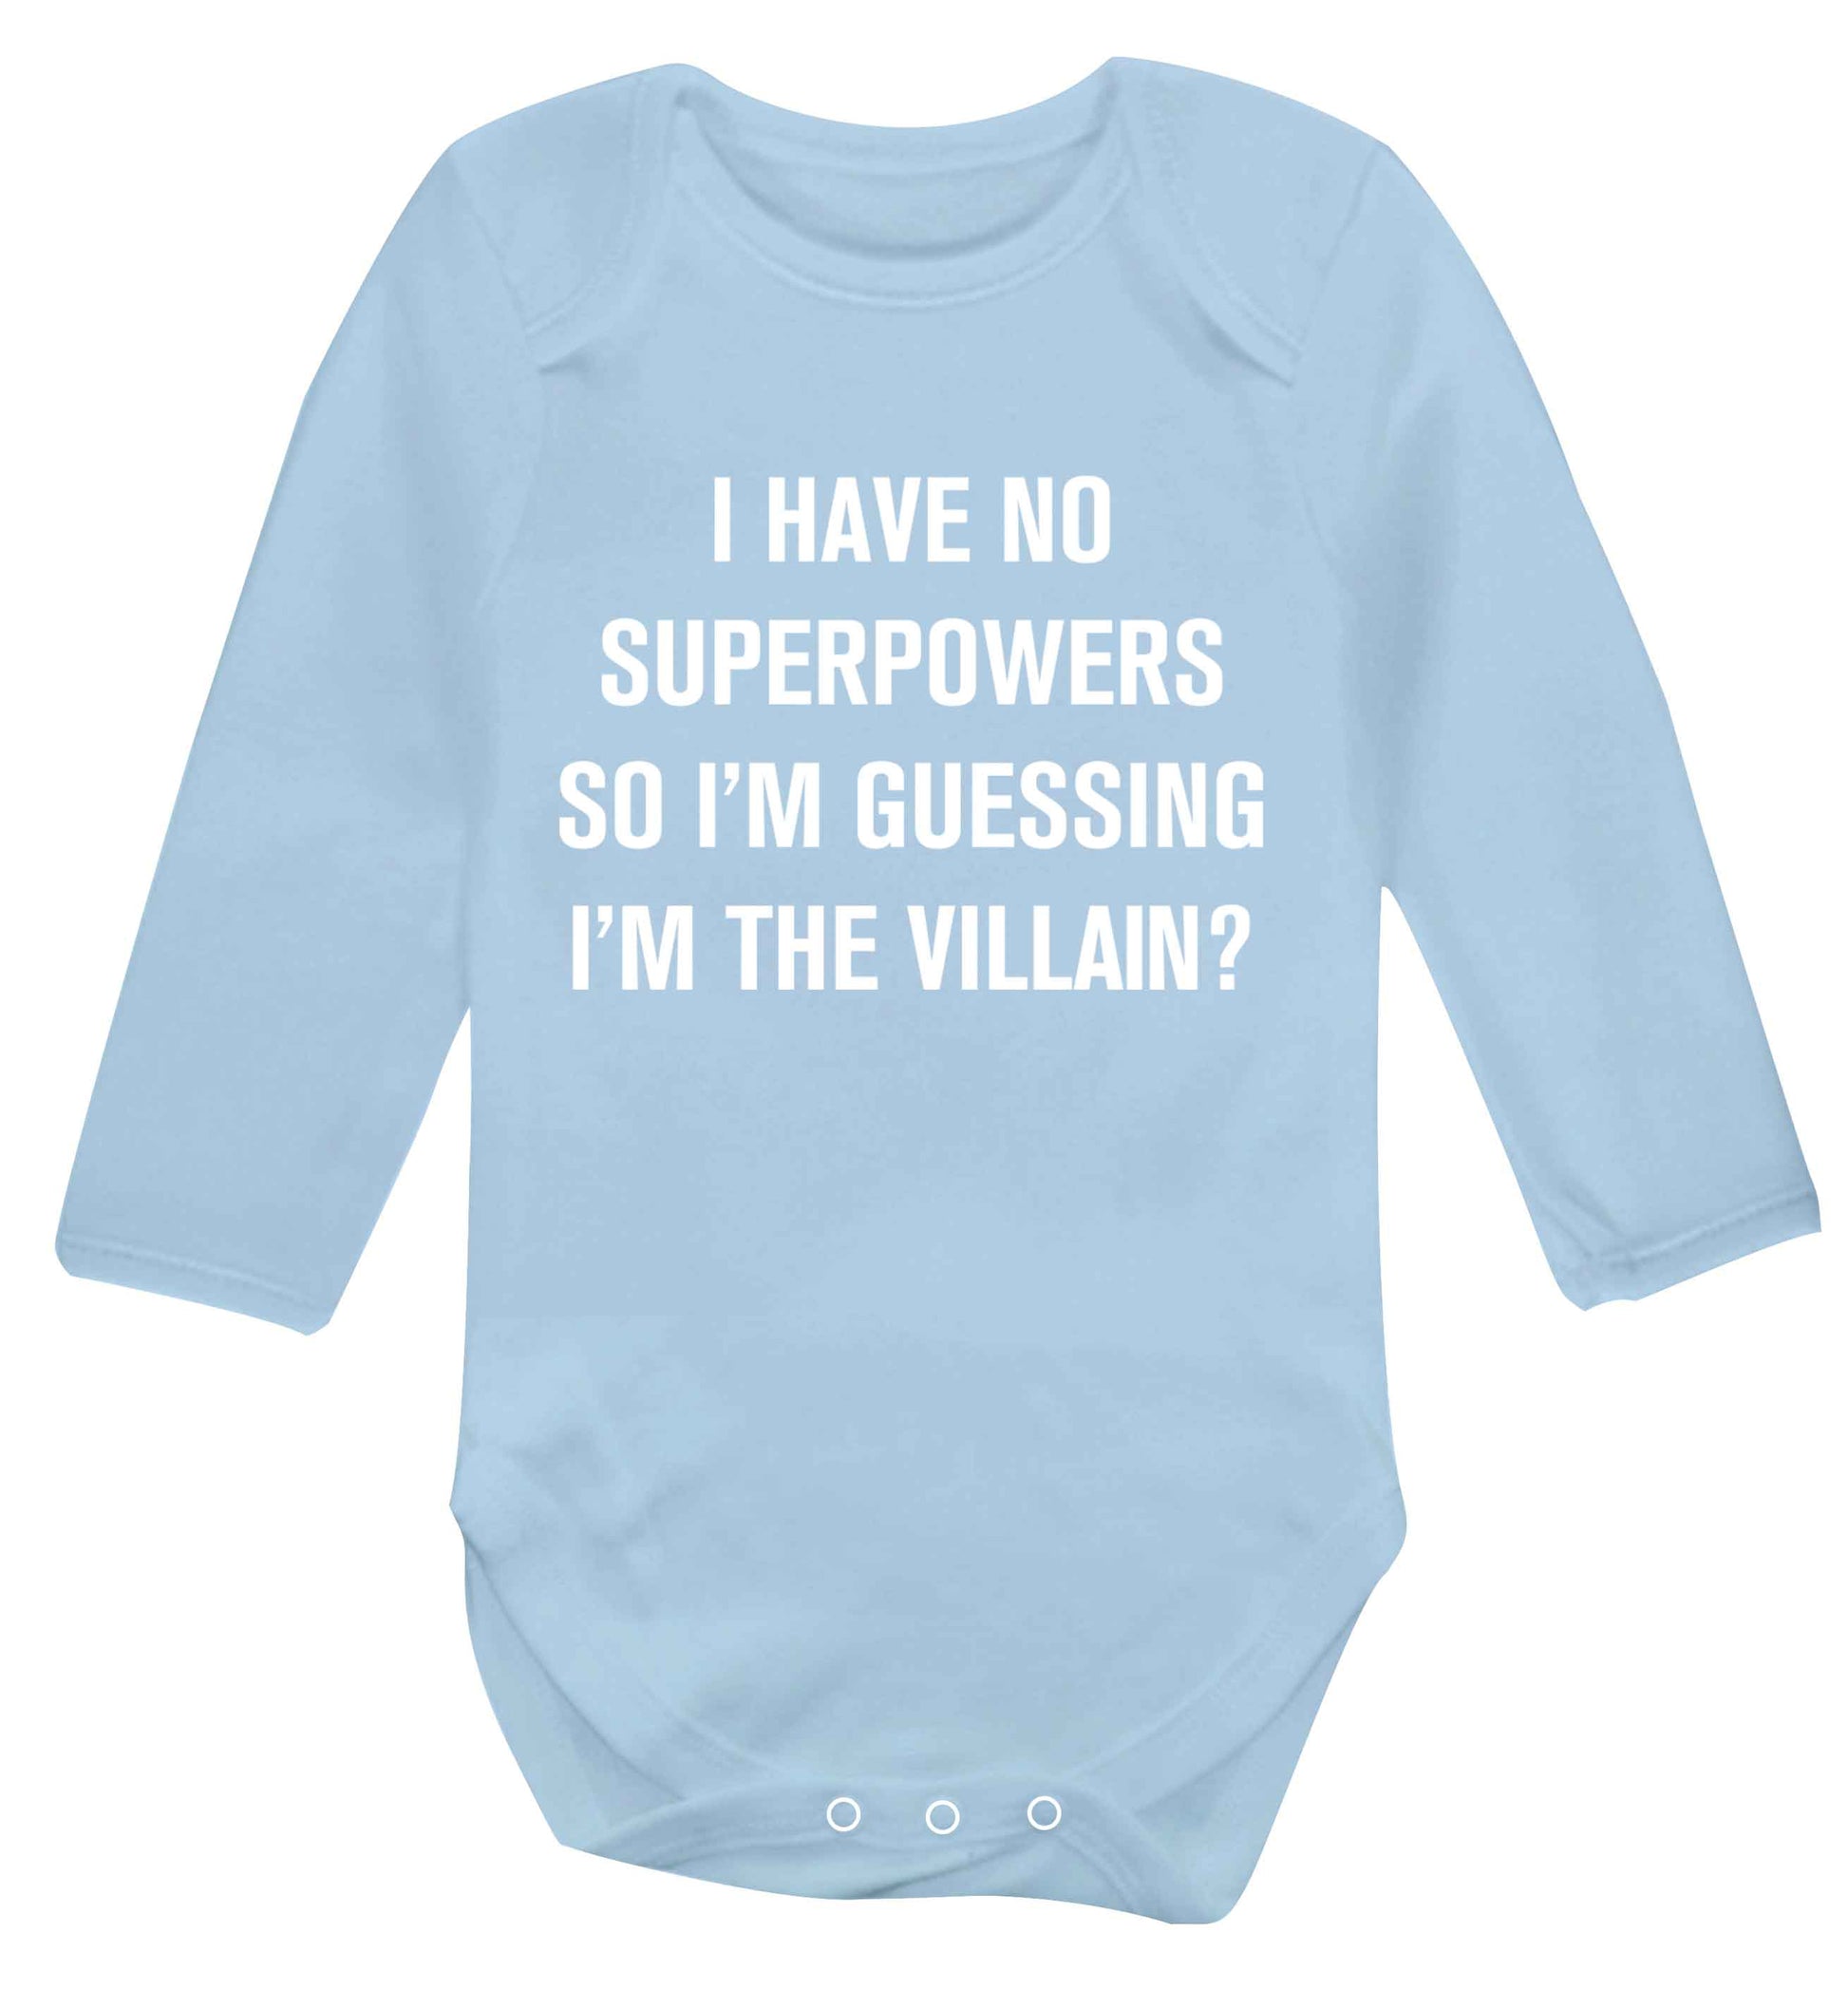 I have no superpowers so I'm guessing I'm the villain? Baby Vest long sleeved pale blue 6-12 months